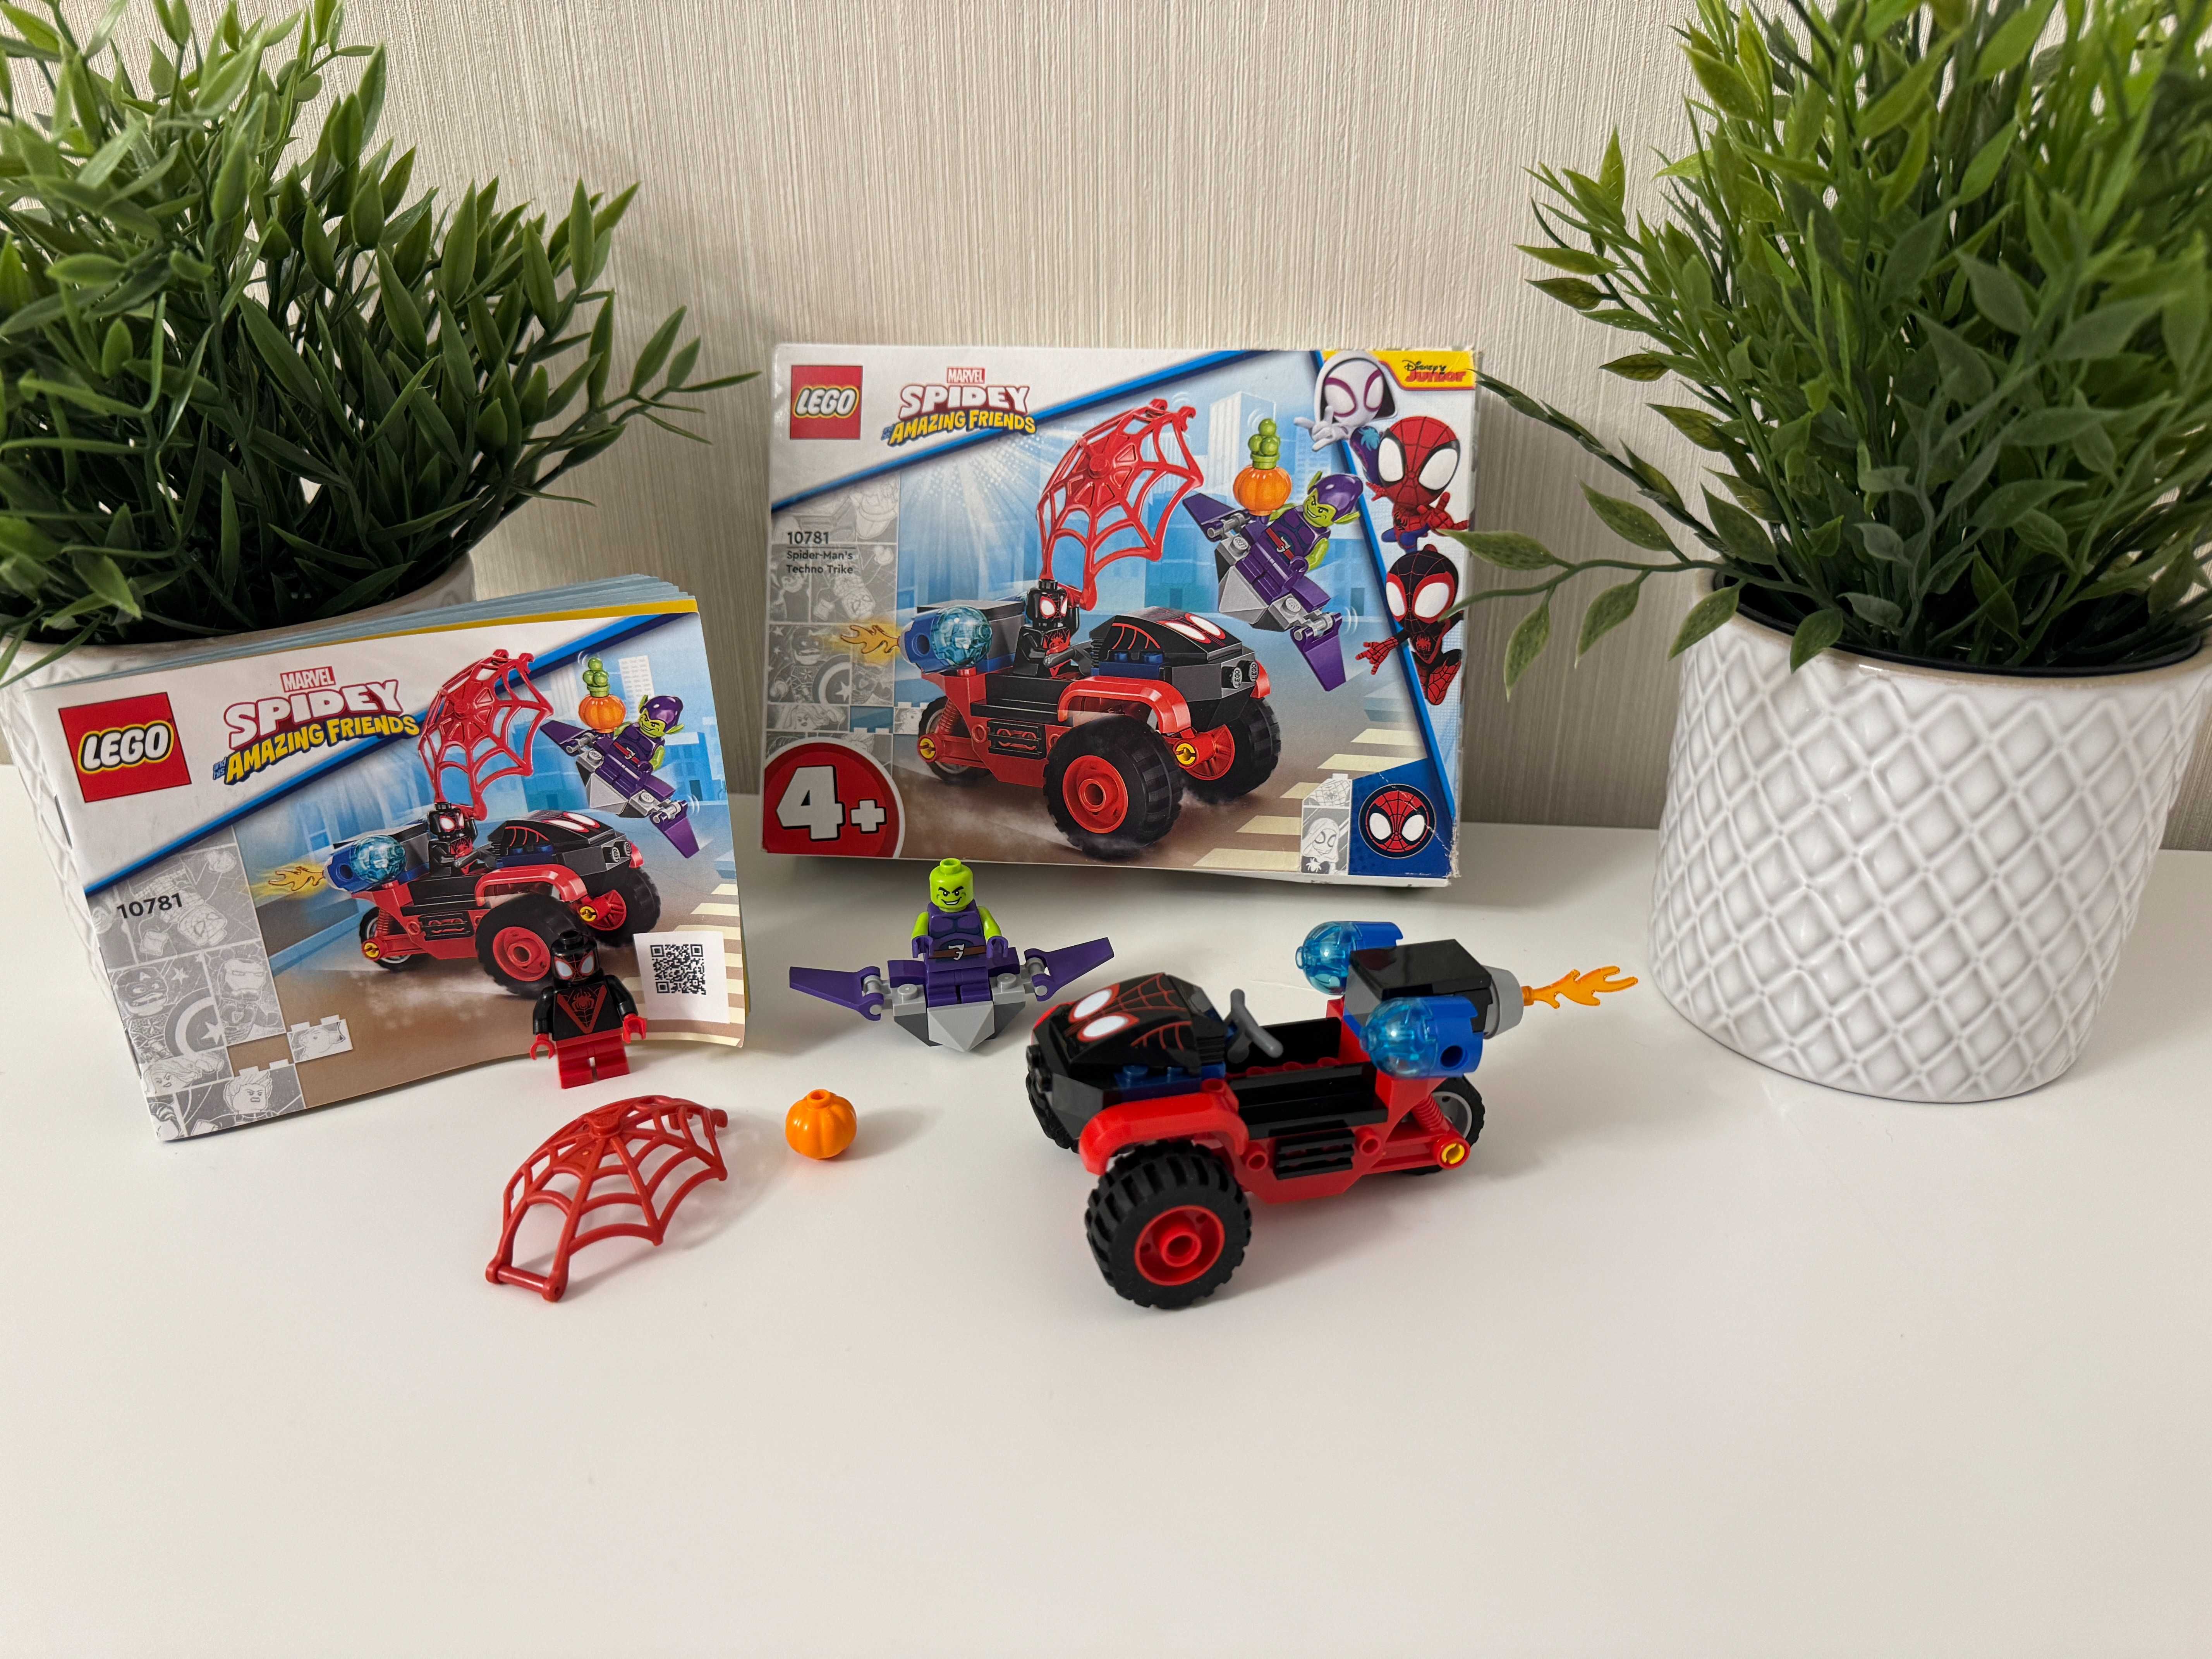 LEGO Super Heroes - Spidey Miles Morales Omul paianjen 10781, 59 piese